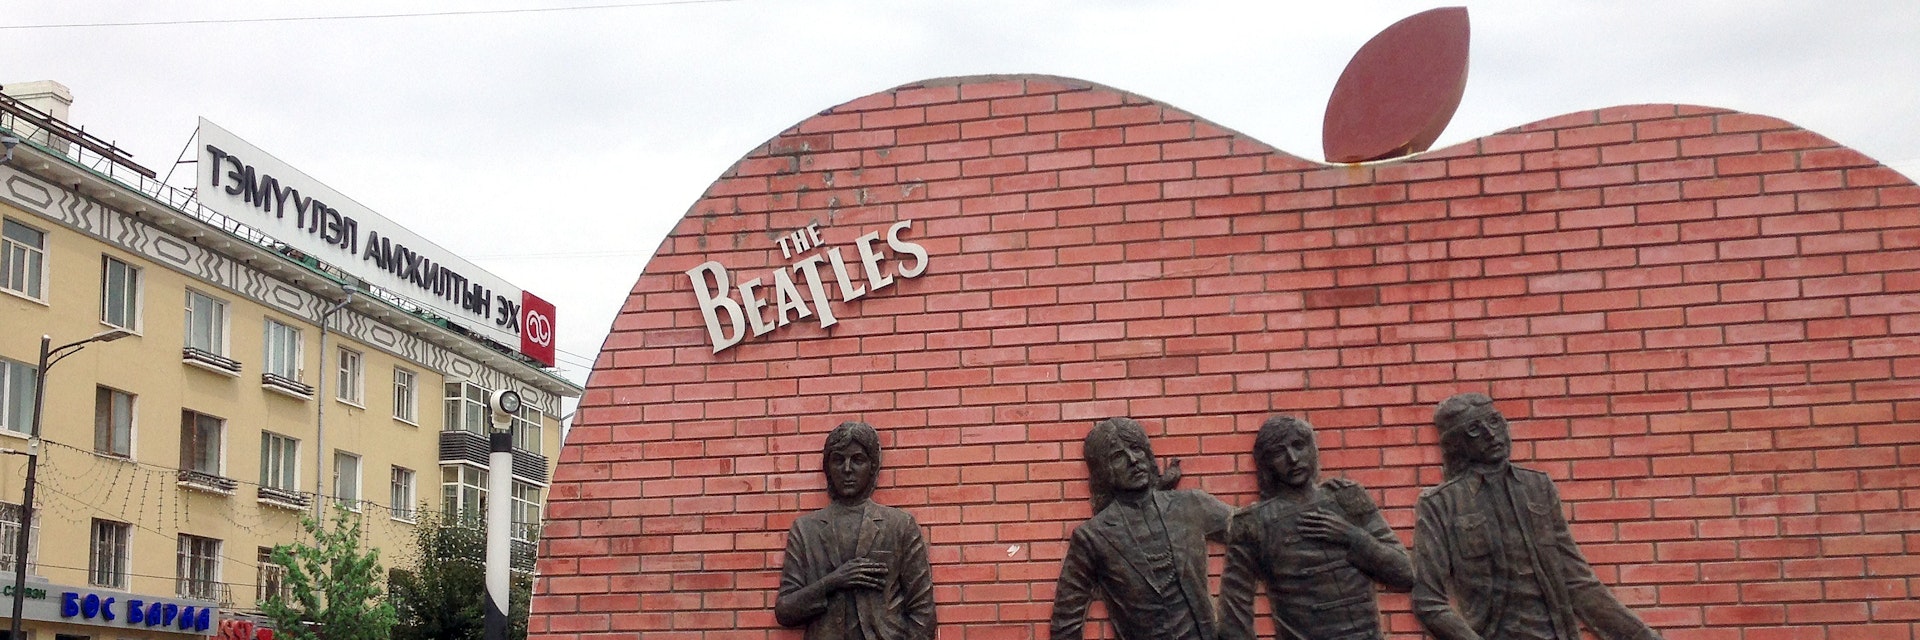 ULAANBAATAR, MONGLIA - JULY 2013 - A Beatles monument in the Mongolian capital depicts Paul McCartney with death symbolism alongside the other three members of the band.; Shutterstock ID 169537319; Your name (First / Last): Josh Vogel; Project no. or GL code: 56530; Network activity no. or Cost Centre: Online-Design; Product or Project: 65050/7529/Josh Vogel/LP.com Destination Galleries